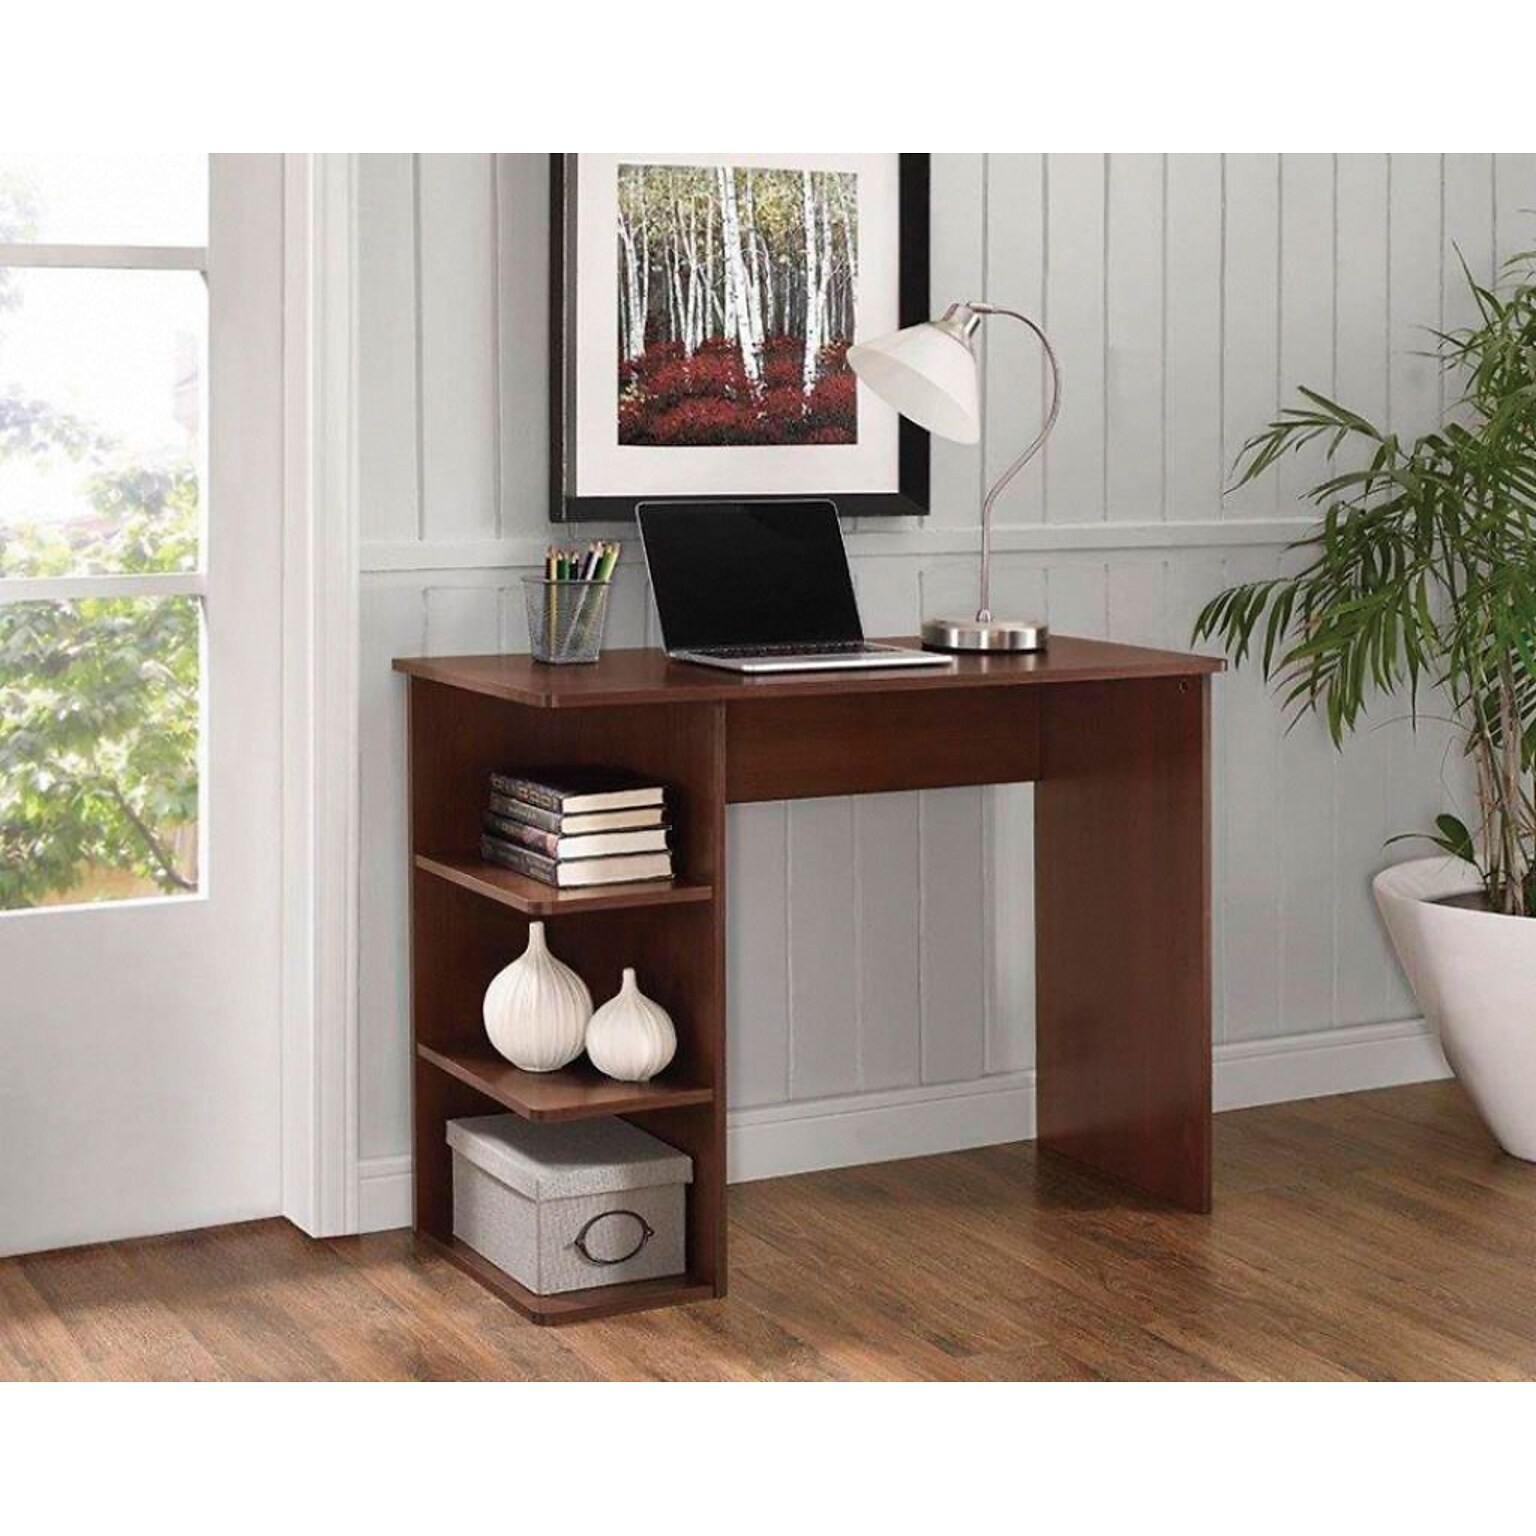 Easy 2 Go 40W Student Desk with bookcases, Brown (WE-OF-0146-CC)